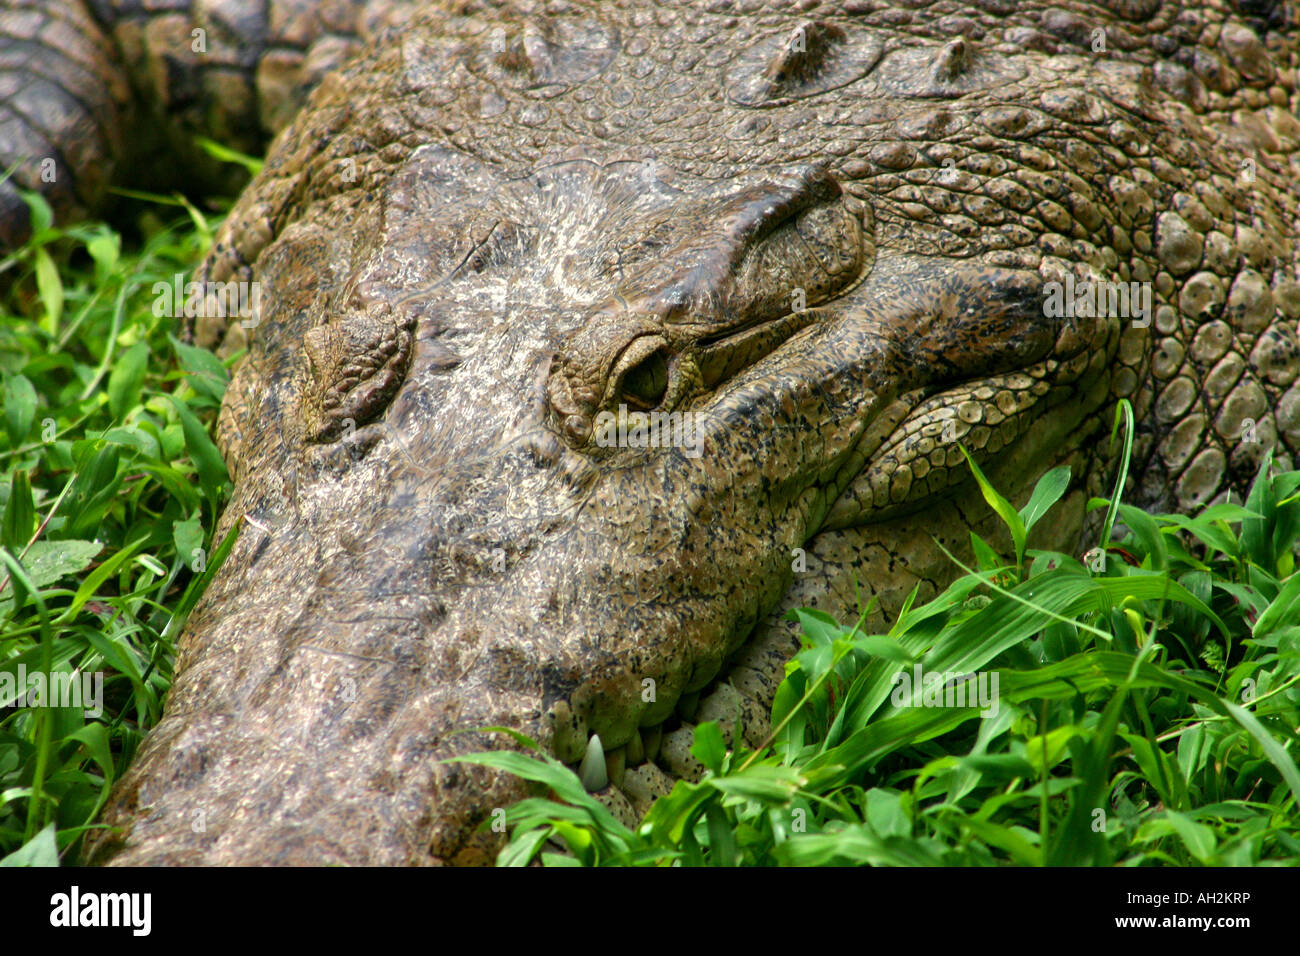 Giant crocodile resting on green grass on a river side at Panama Central America Stock Photo